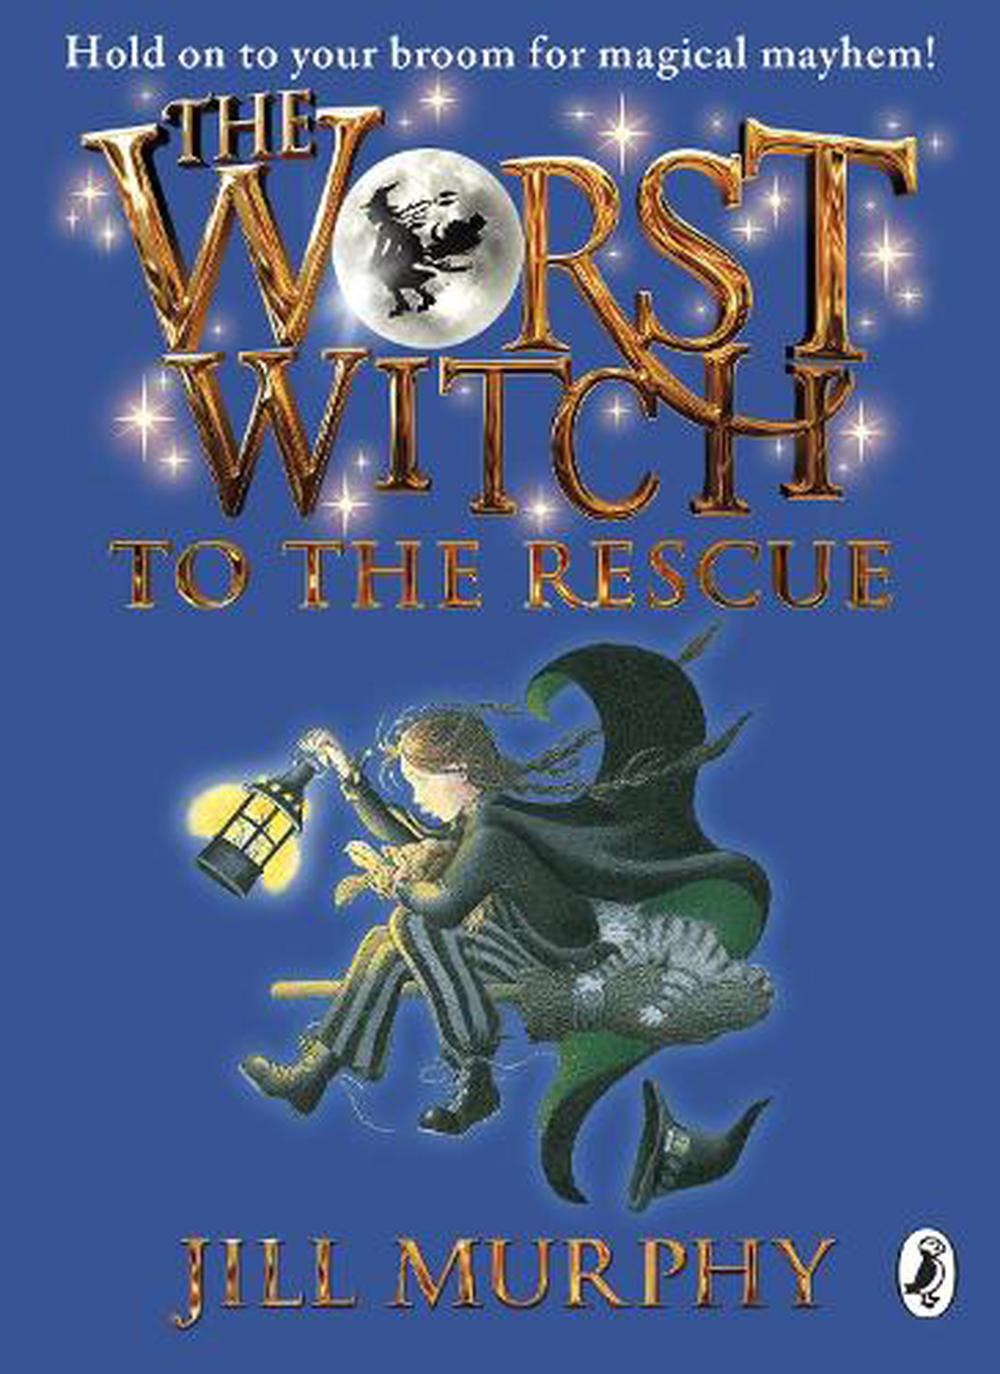 the worst witch books age range